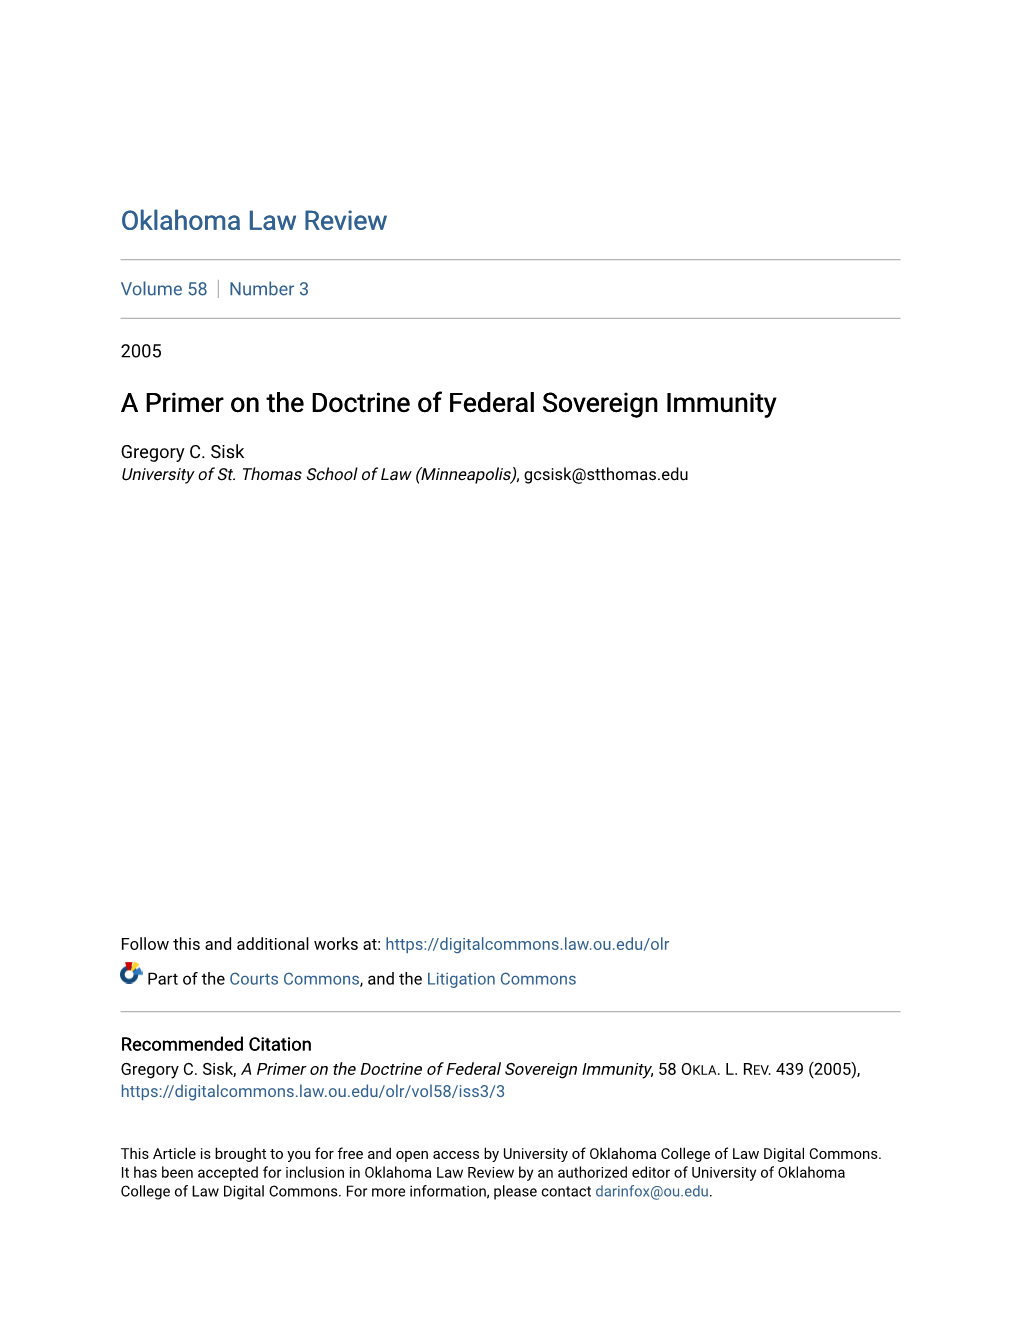 A Primer on the Doctrine of Federal Sovereign Immunity